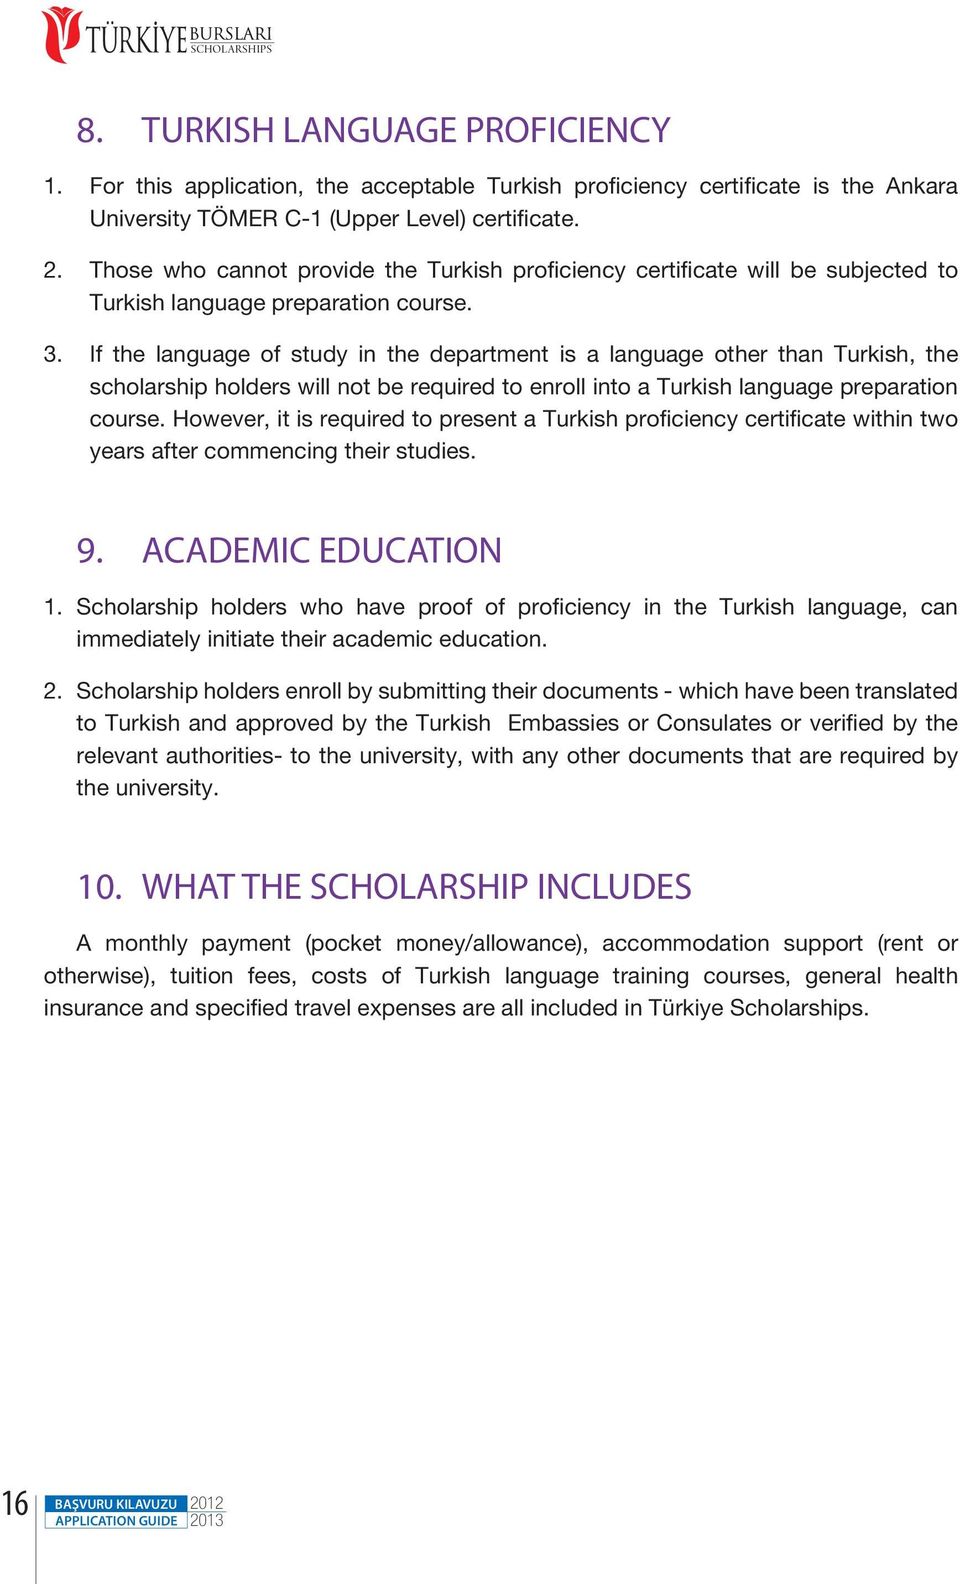 If the language of study in the department is a language other than Turkish, the scholarship holders will not be required to enroll into a Turkish language preparation course.